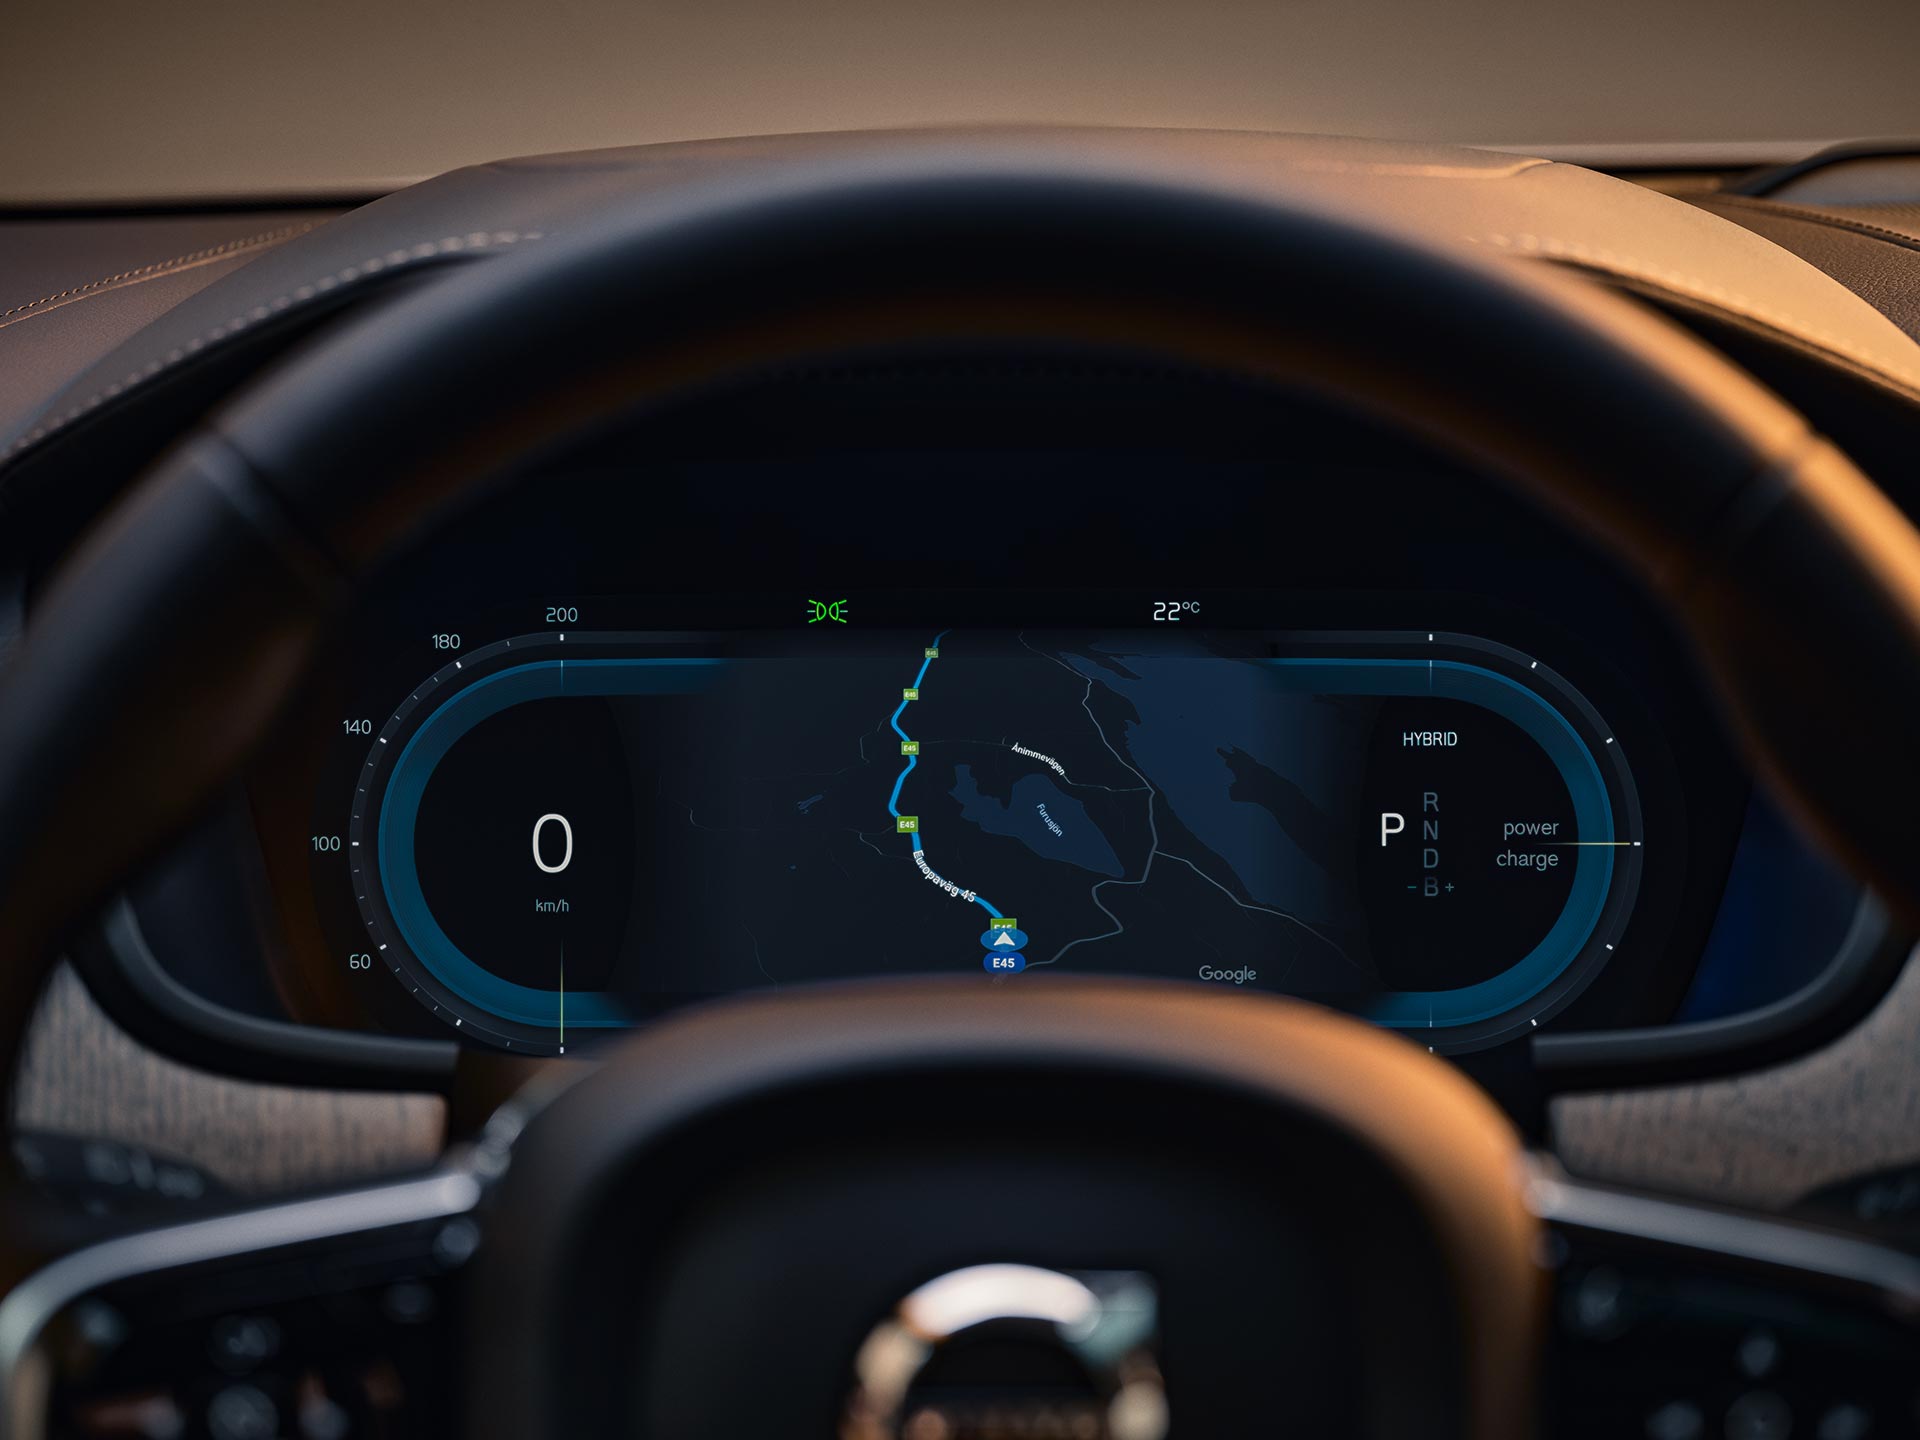 Close-up image of the driver display from the inside of a Volvo S90.